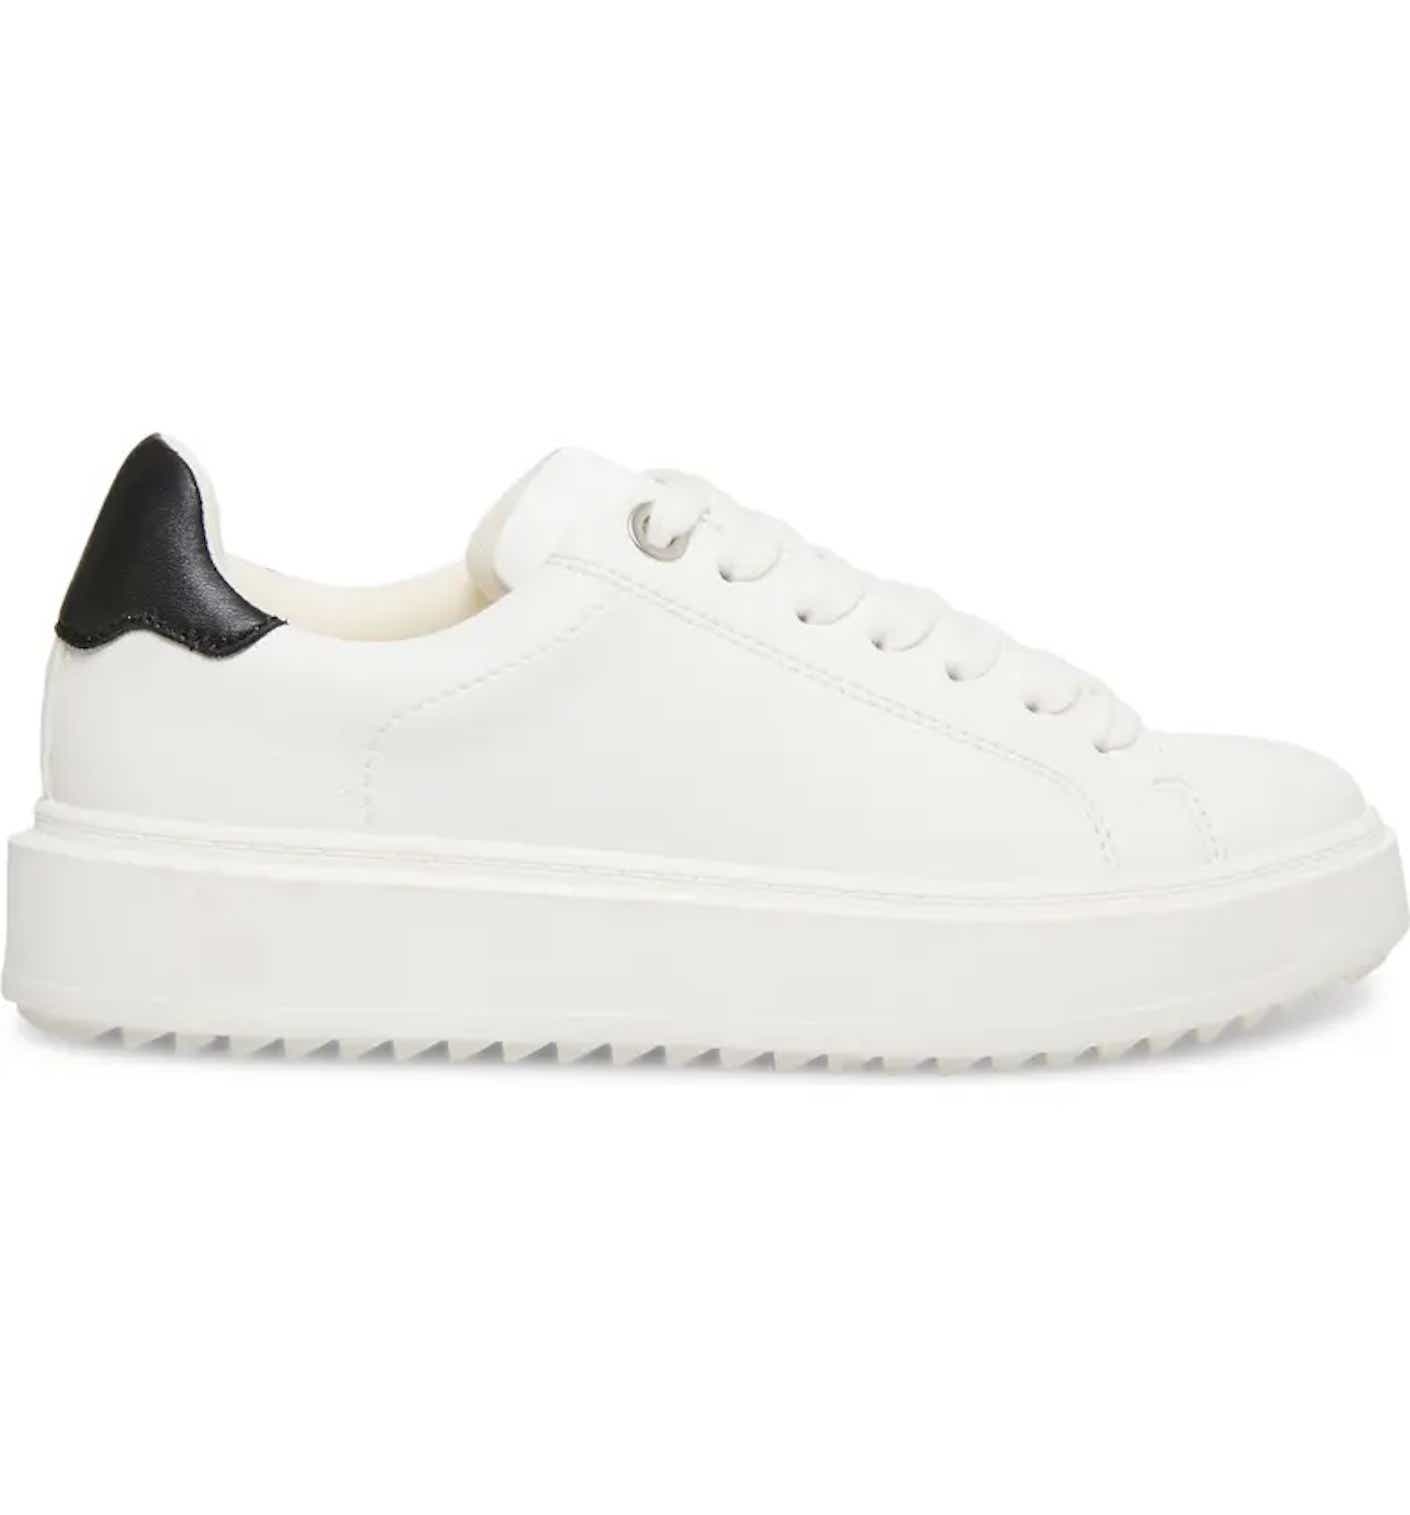 A minimalistic white platform sneaker with a black leather back pictured in front of a white background.